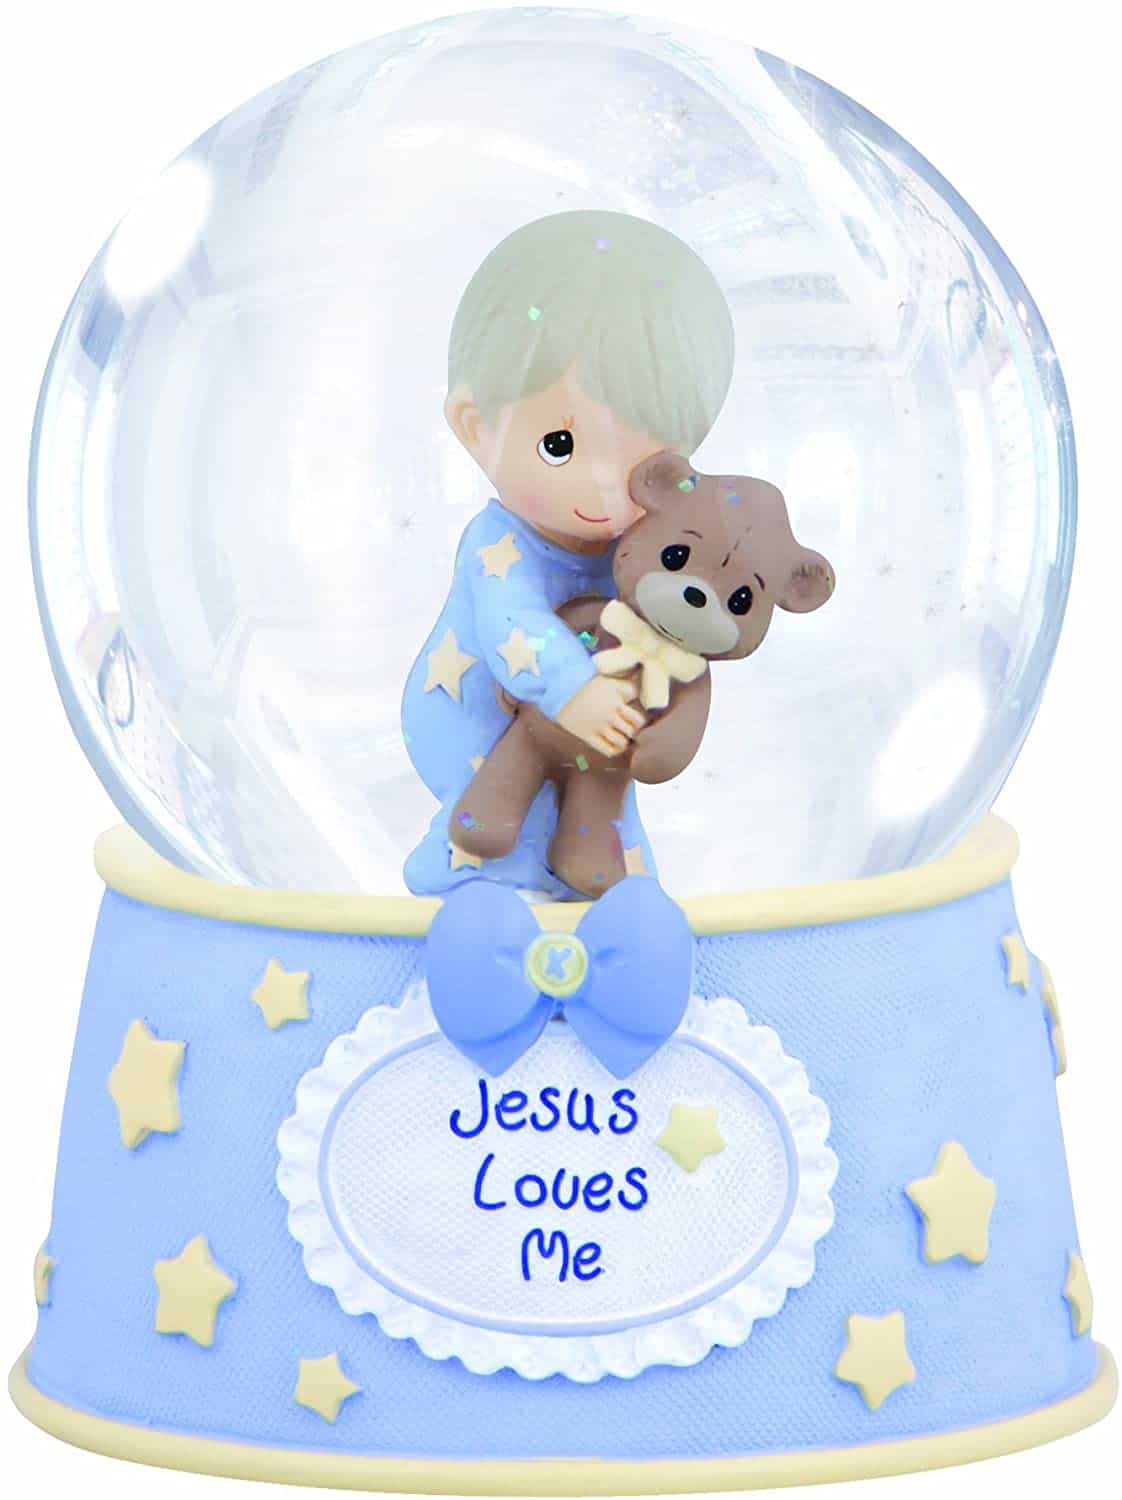 Blue Snow Globe with text "Jesus Loves Me" - Baptism gifts for boys